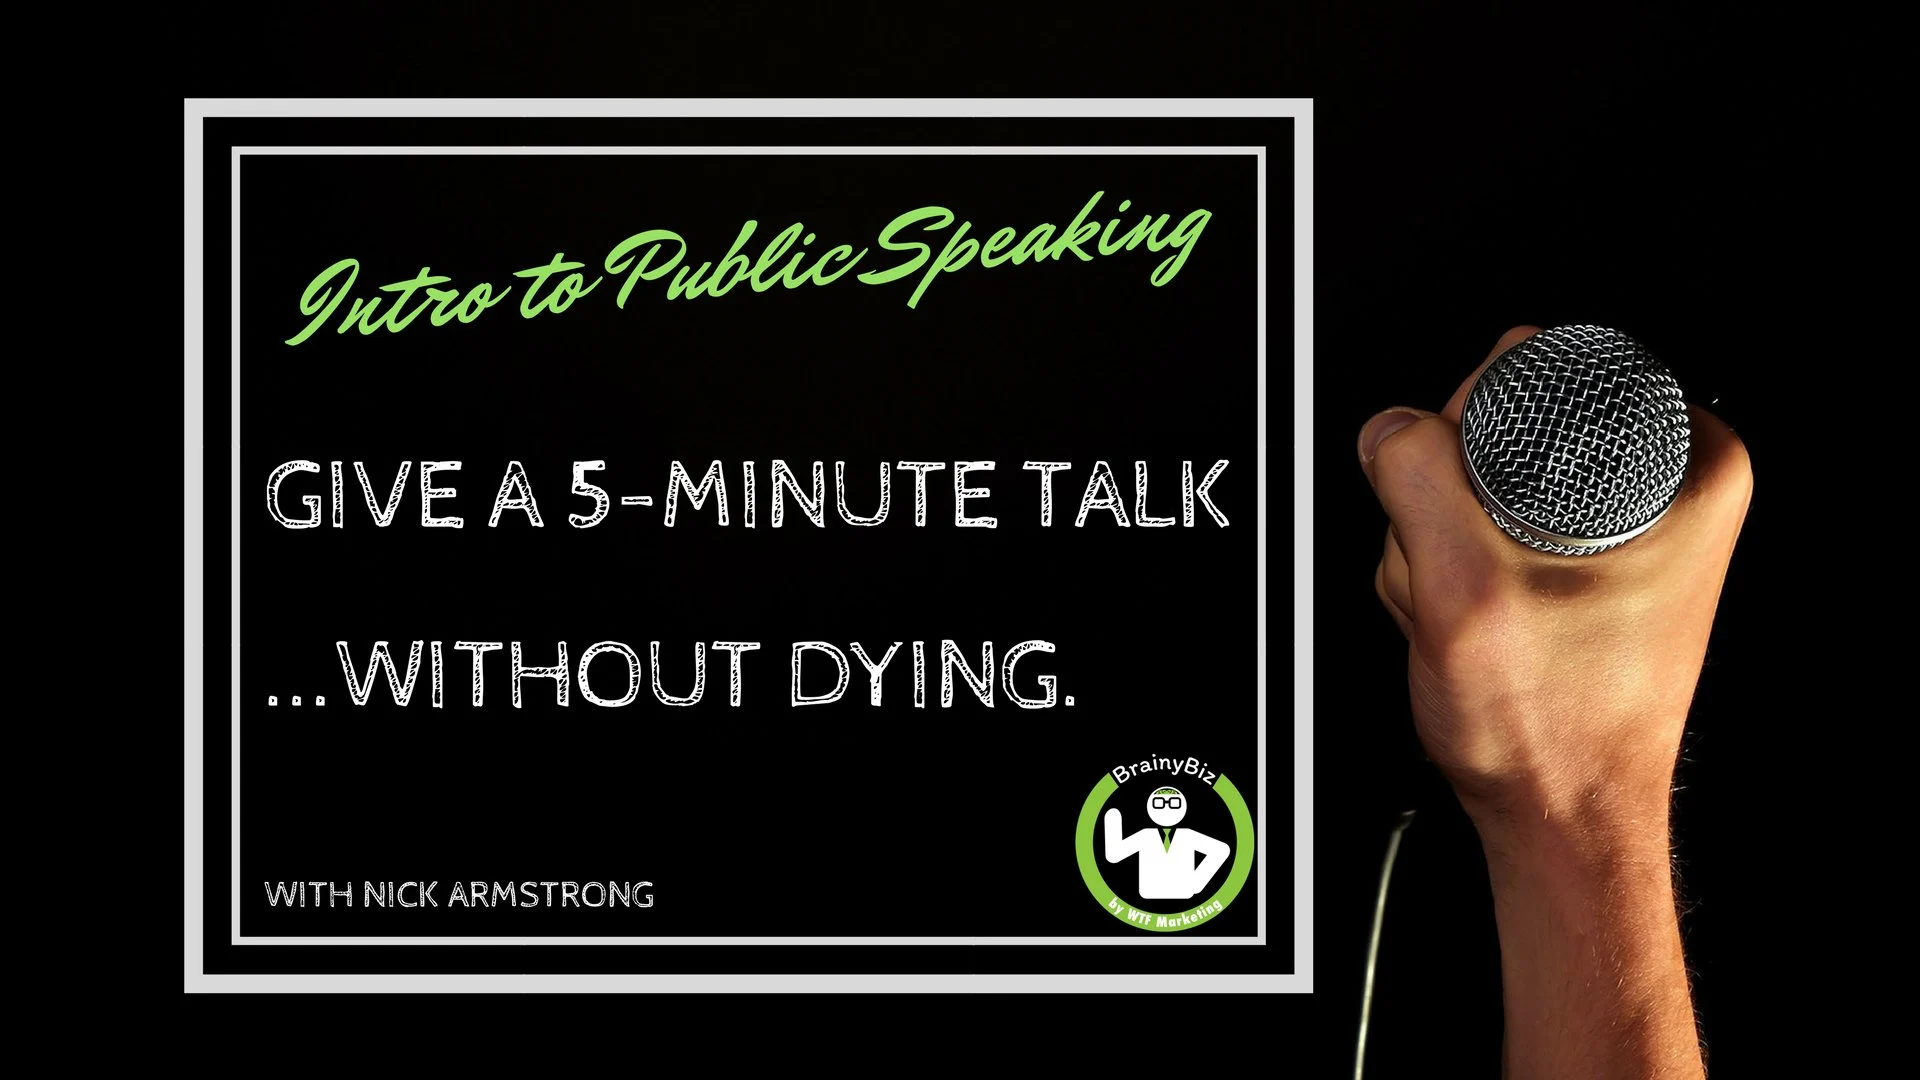 Intro to Public Speaking – Give a 5-Minute Talk Without Dying